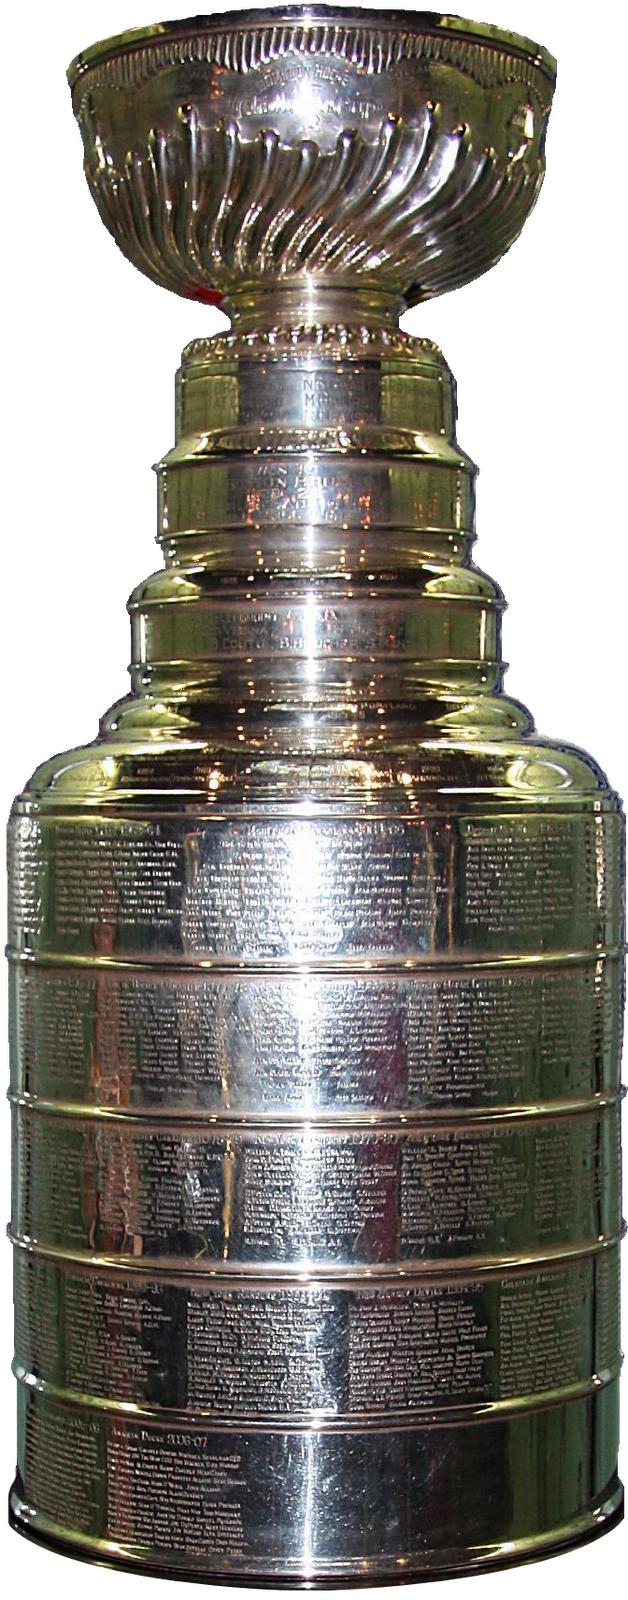 KW Benjamin's Blog: List of NHL Stanley Cup Champions